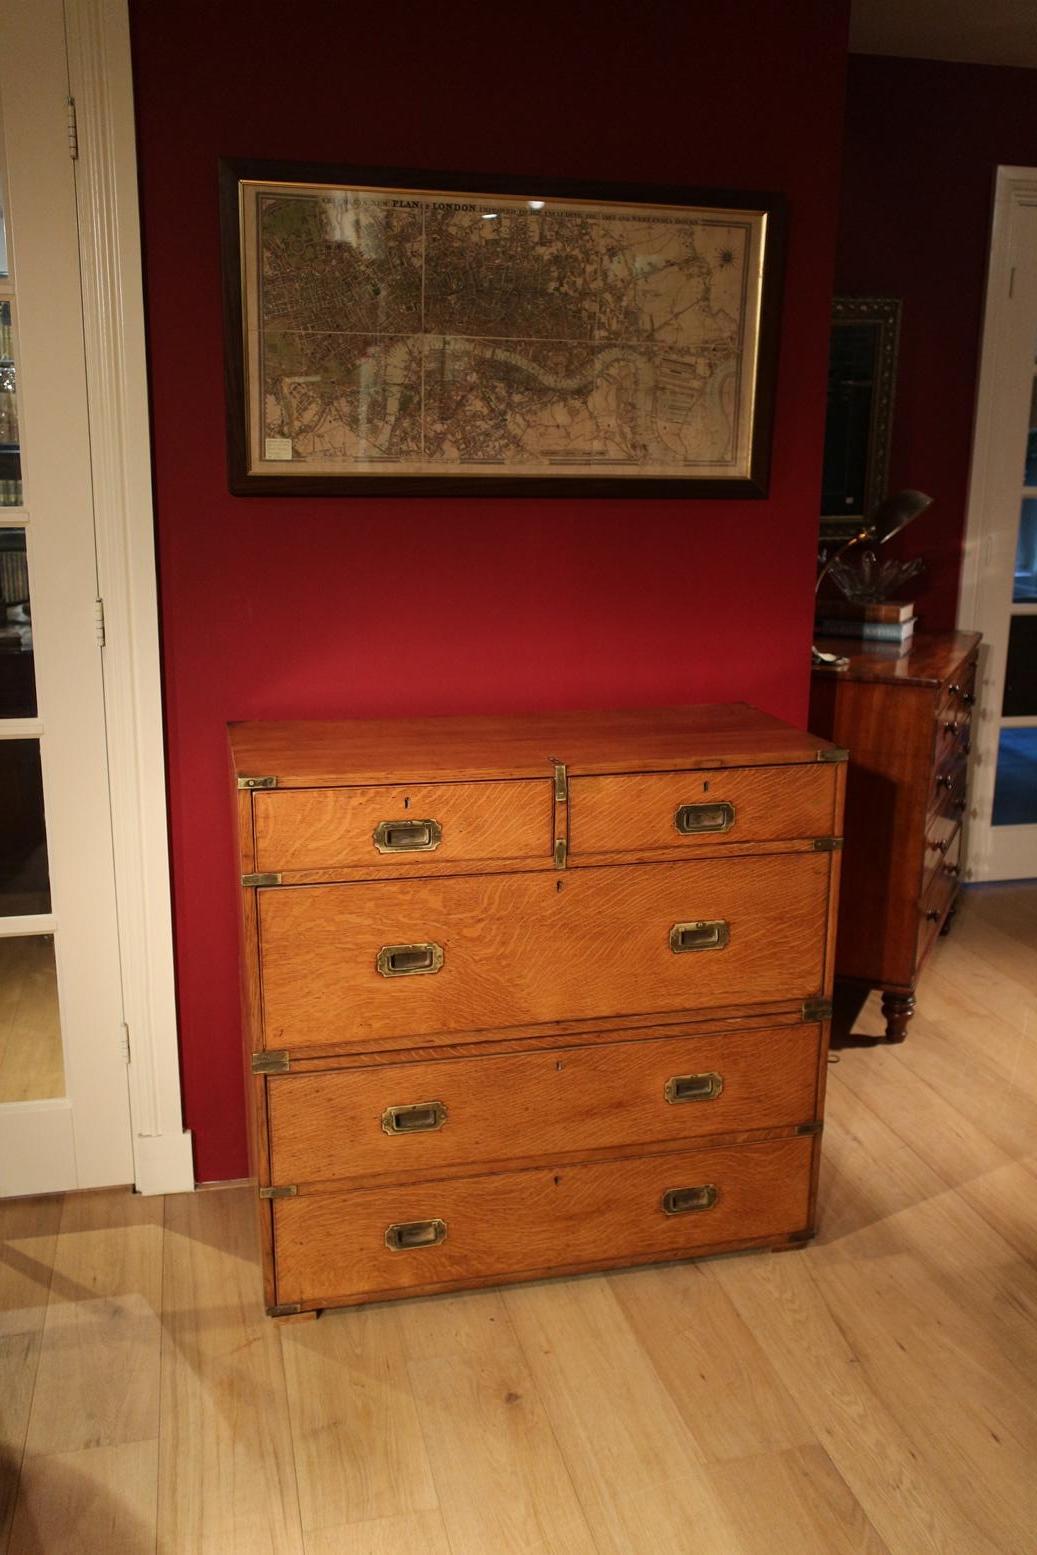 Here we have a fine military chest in oak. The chest is made in two sections for the ease of transportation, either by sea or pack horse and mule.
This particular chest would have been made for an officer for Campaign.
The chest of drawers has the